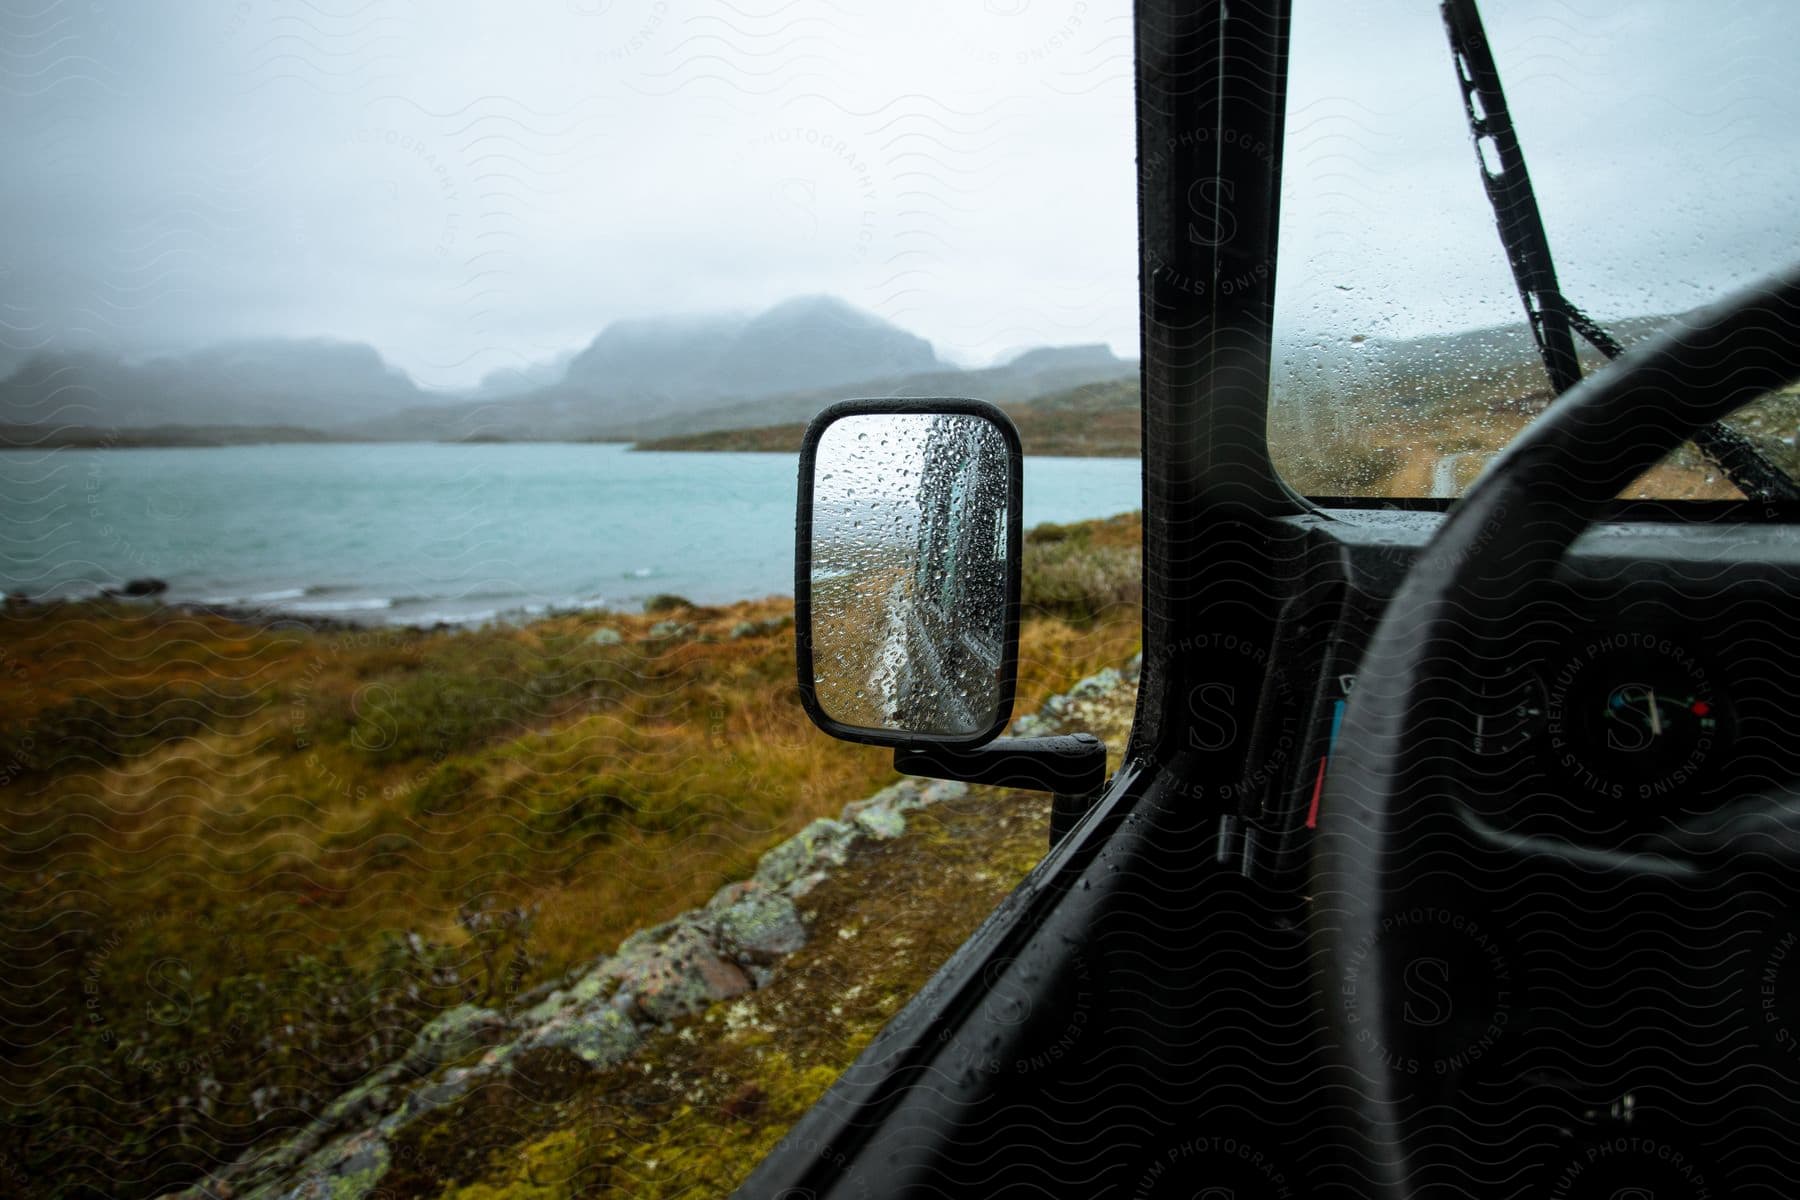 Raindrops cover the cars side view mirror and windshield as a serene lake is surrounded by rocks and grass